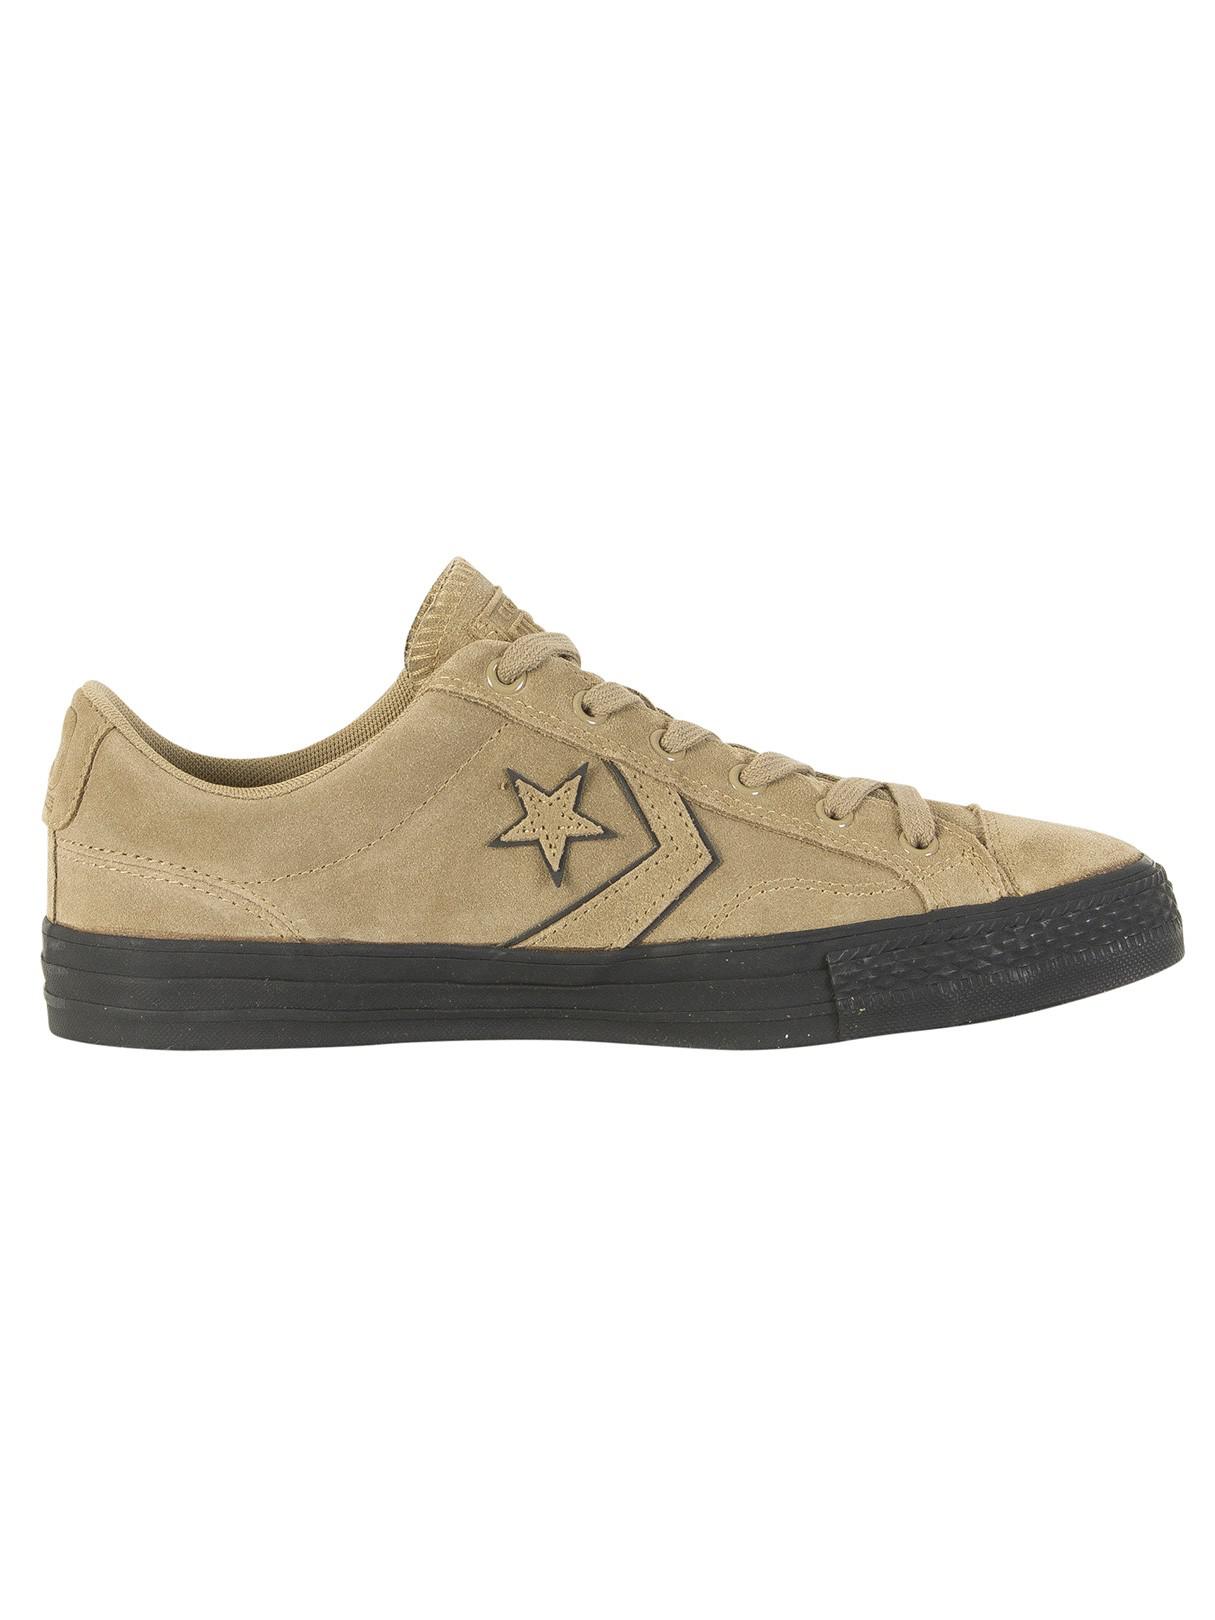 converse khaki star player ox trainers